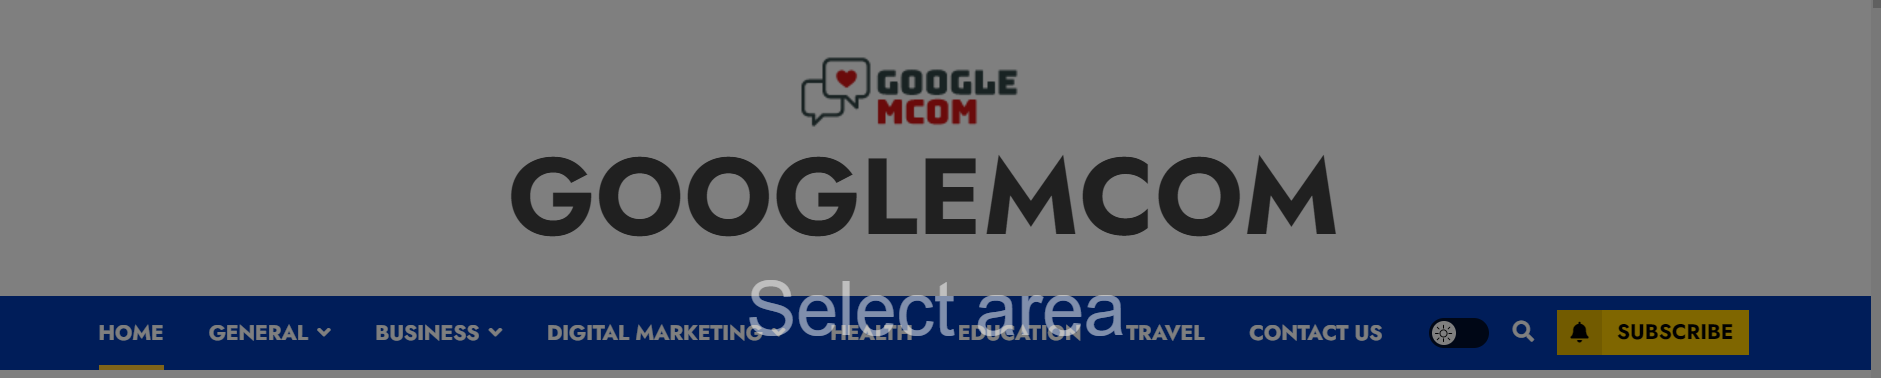 Why You Should Be Interested In Googlemcom